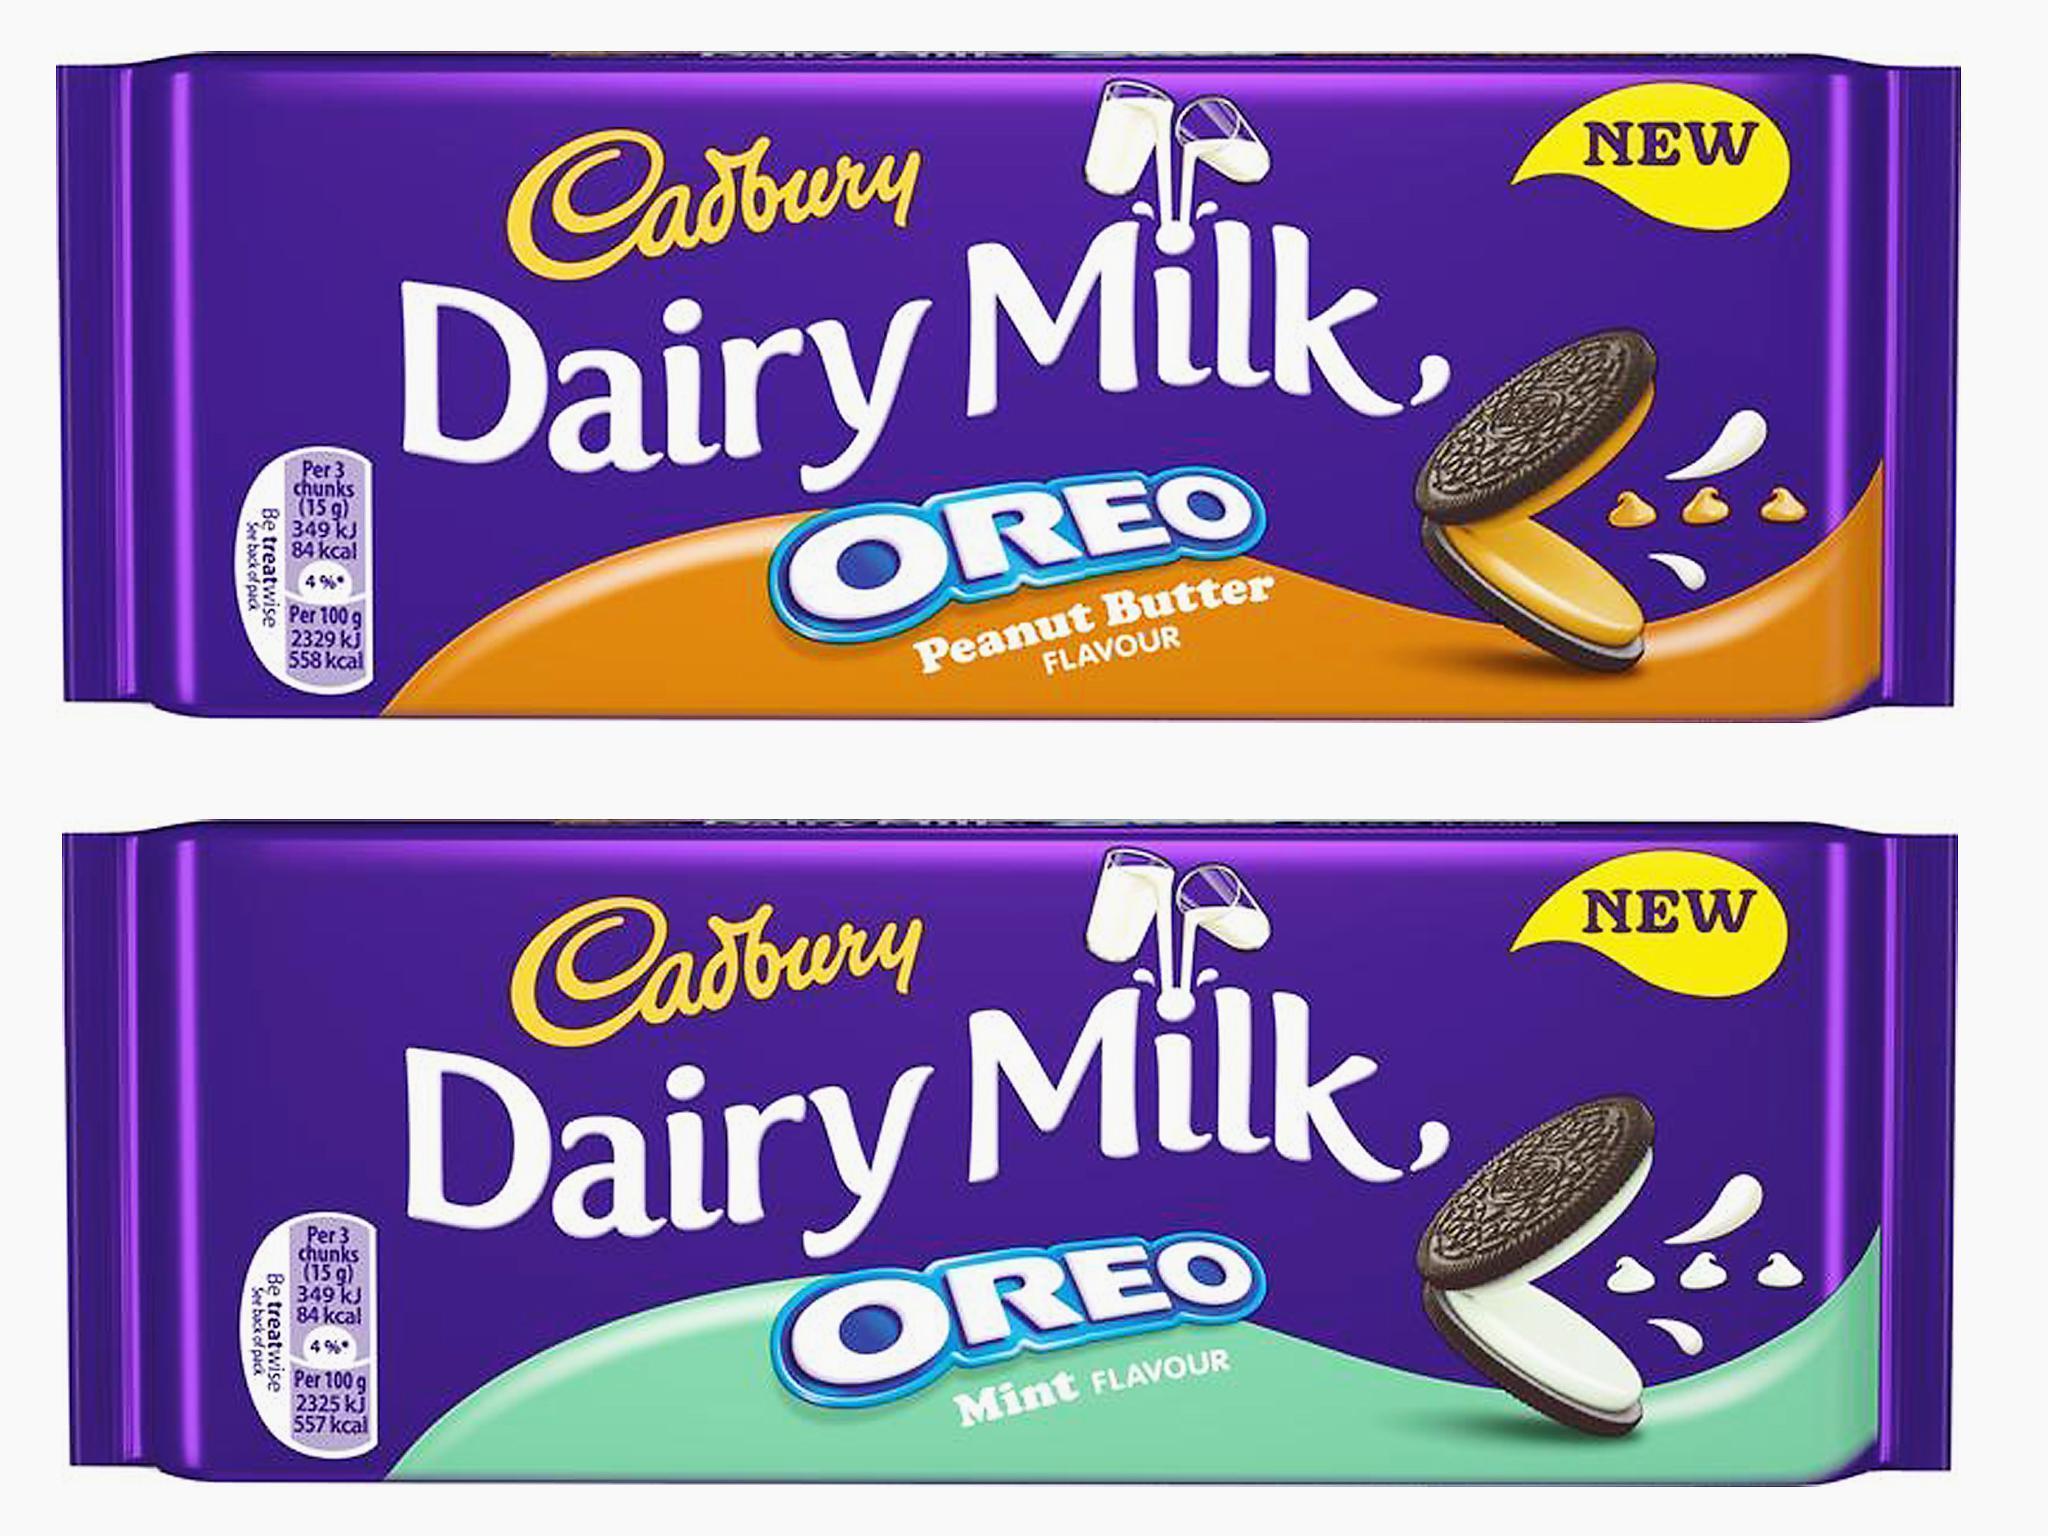 The chocolate bars will be available in most major super markets as 120g bars, priced at £1.49